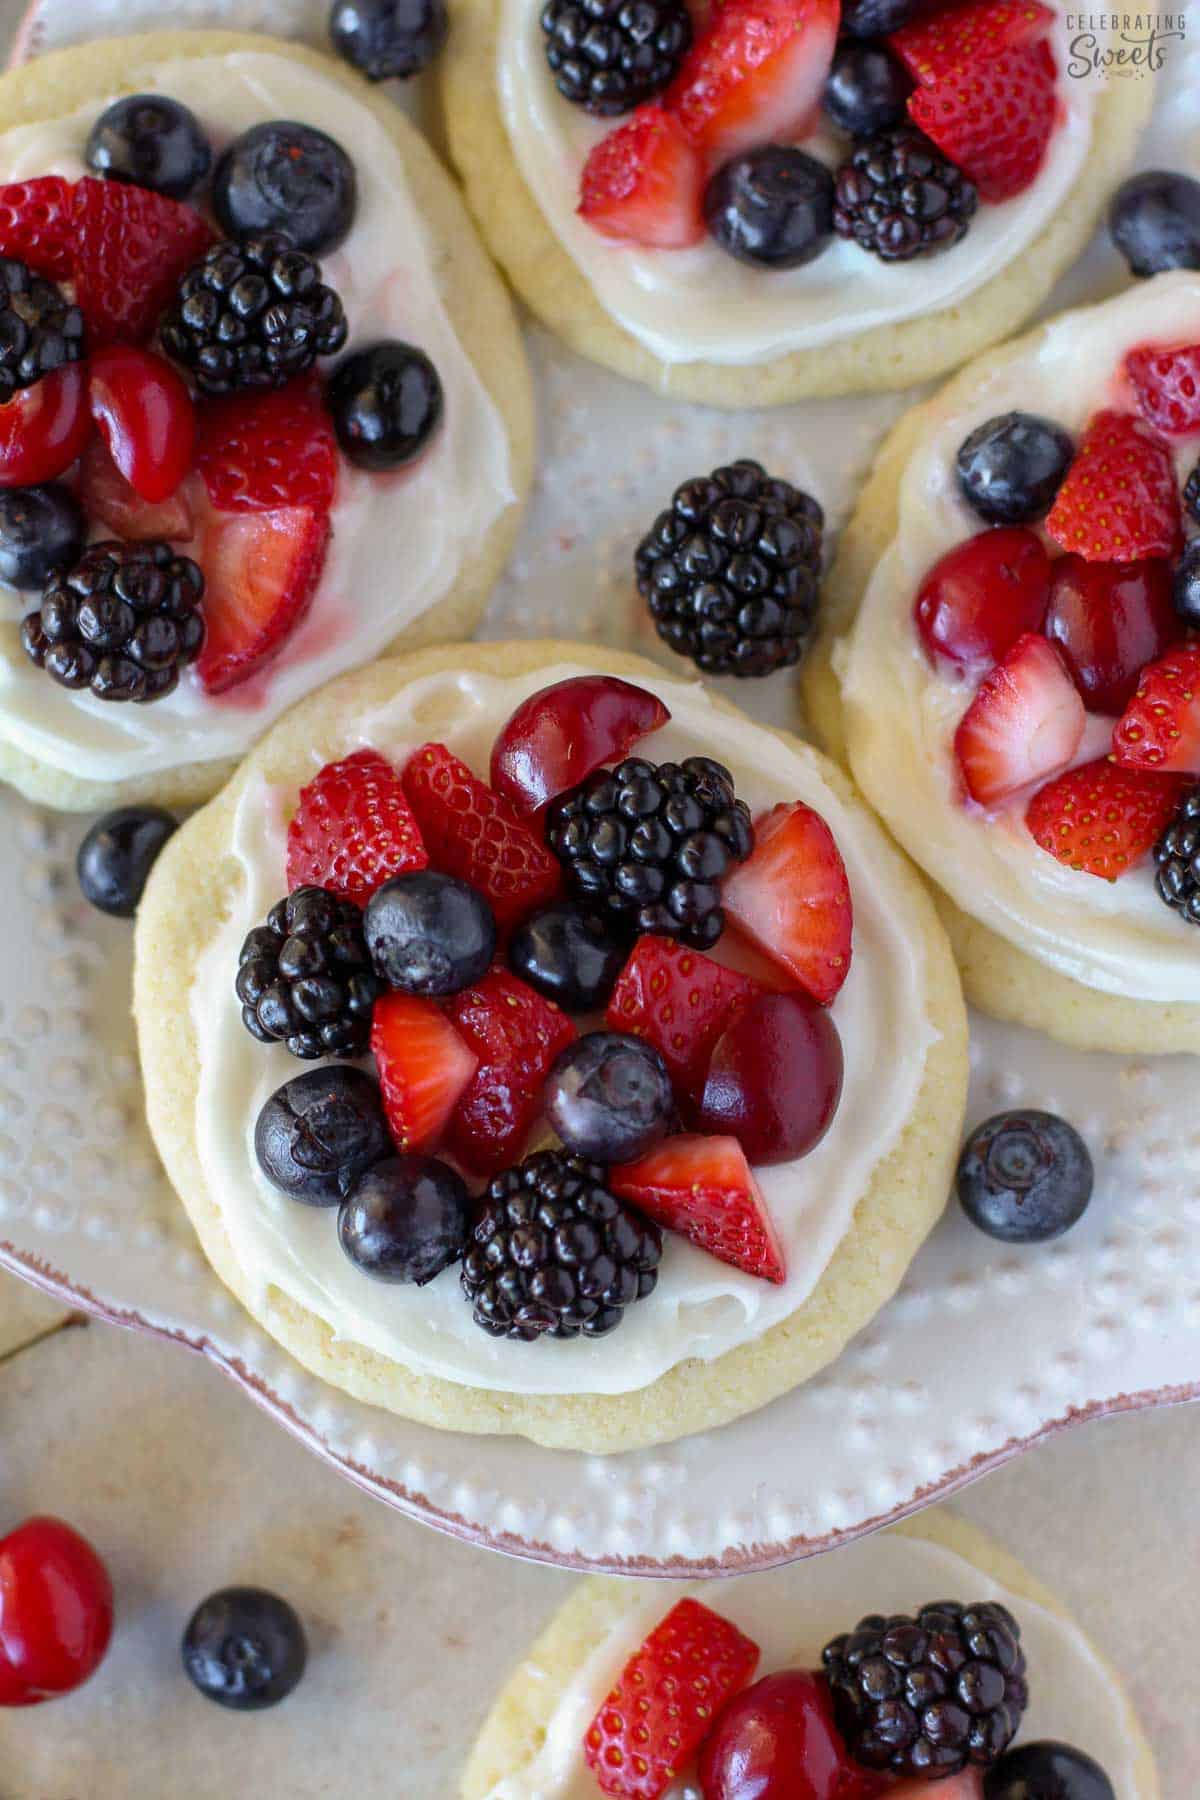 Sugar cookie fruit tarts topped with berries on a white plate.